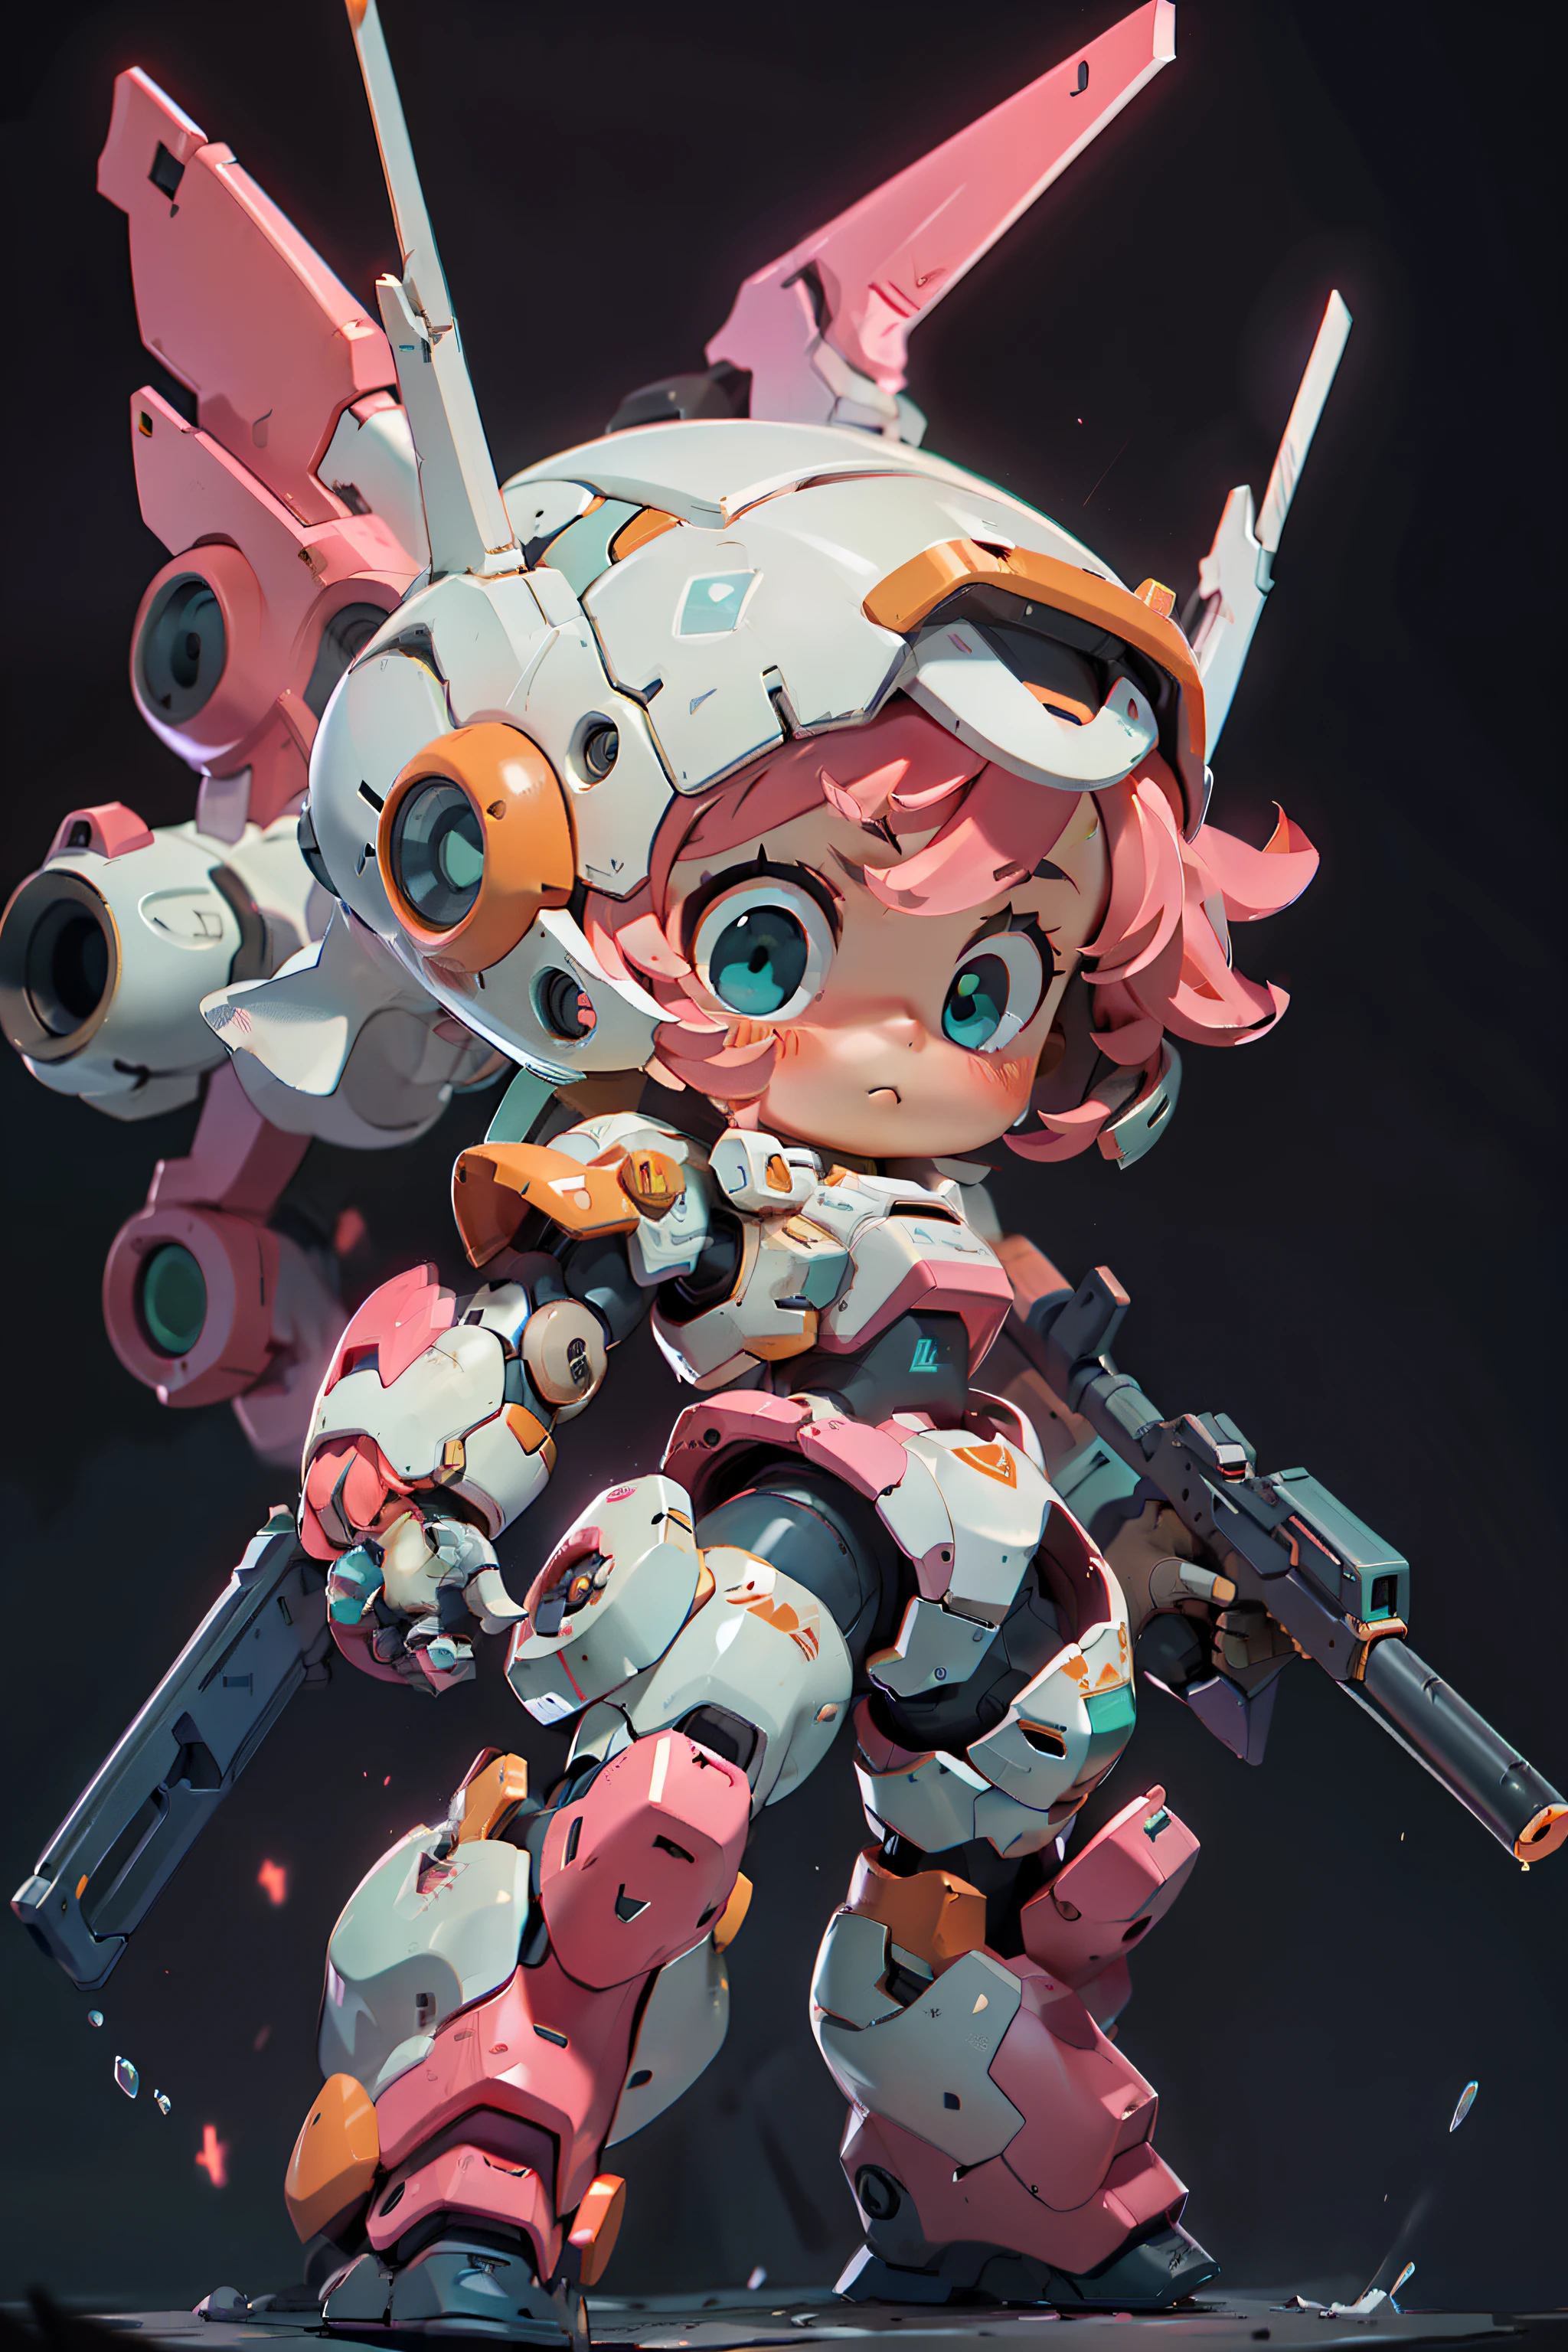 BJ_Cute_Mech,1girl,solo,blush,blue_eyes,holding,closed_mouth,standing,full_body,weapon,pink_hair,chibi,holding_weapon,armor,aqua_eyes,gun,helmet,black_background,clenched_hand,holding_gun,mecha_musume,power_armor,
cinematic lighting,strong contrast,high level of detail,Best quality,masterpiece,White background,